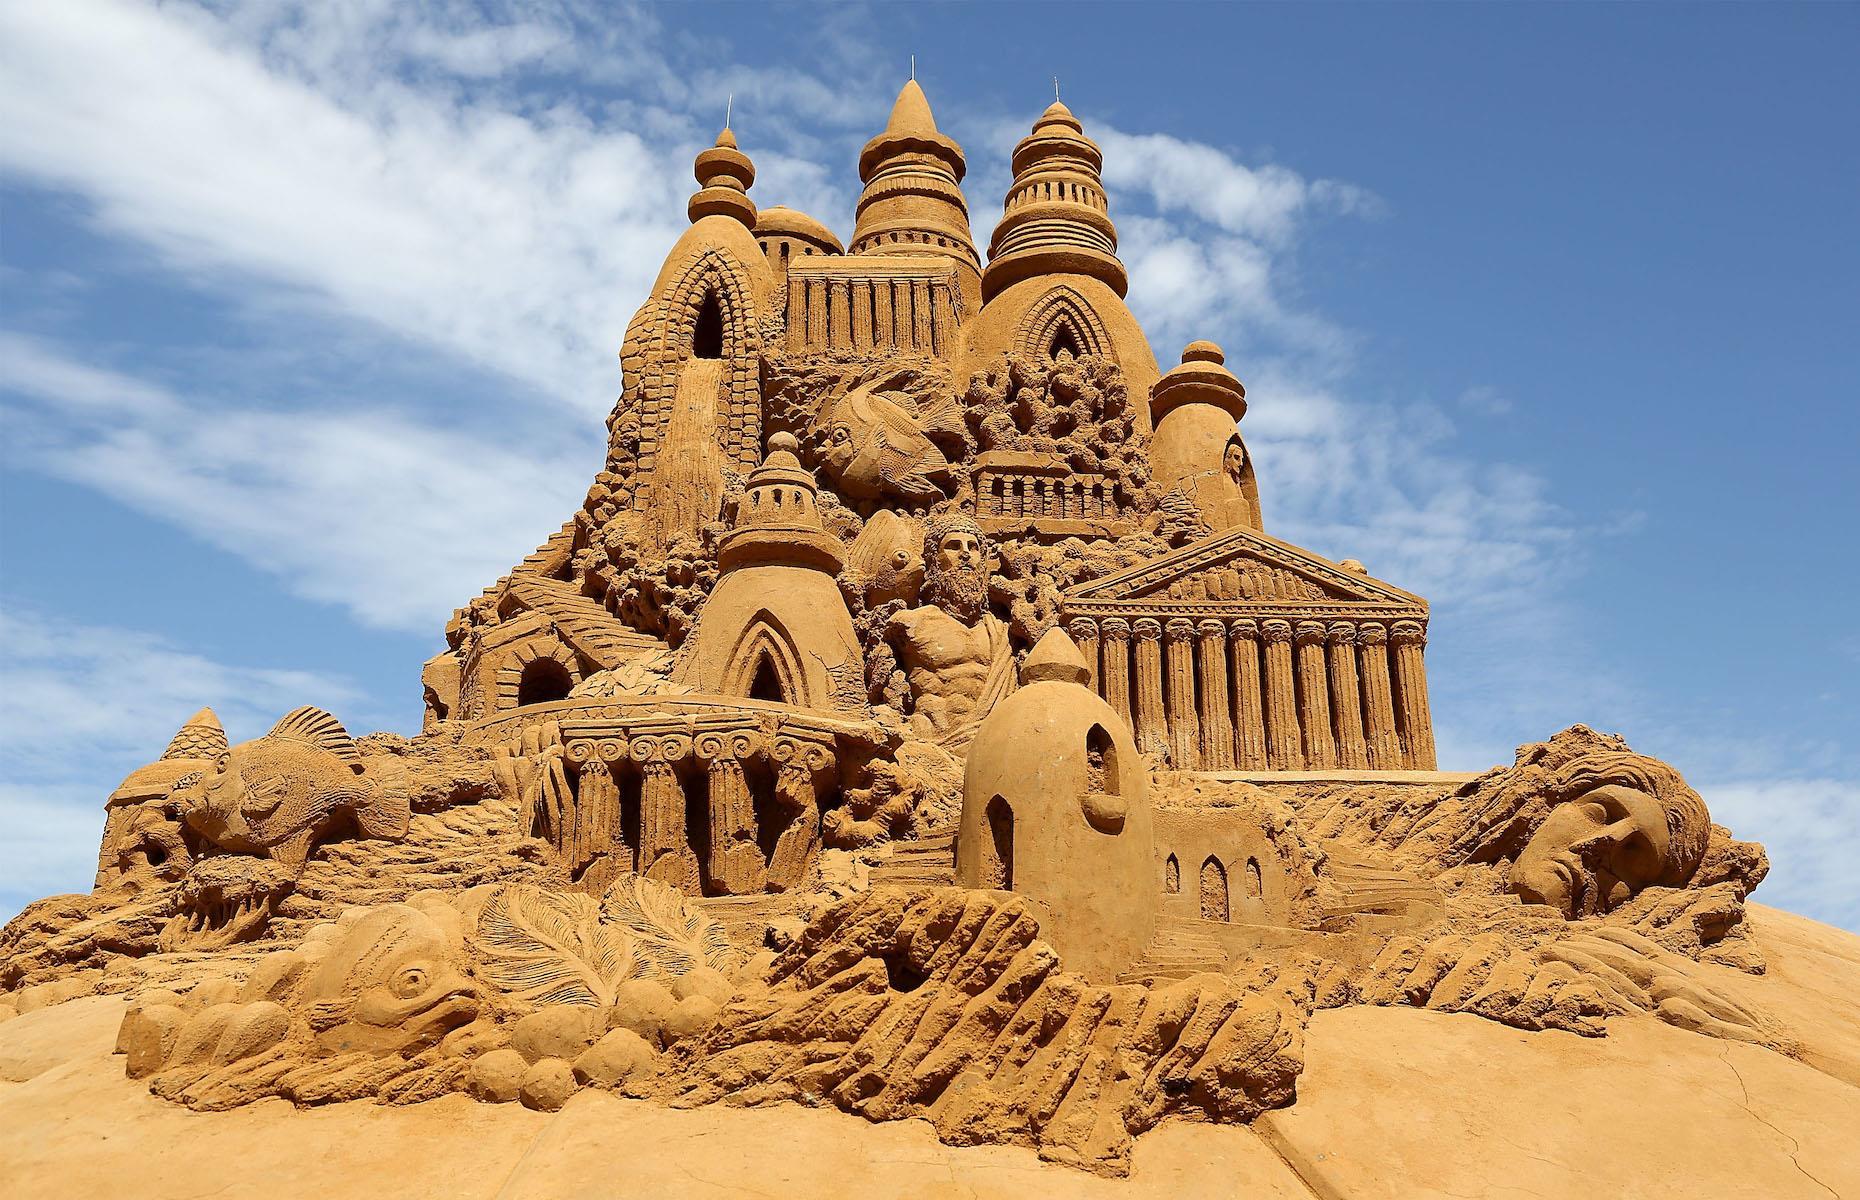 <p>We all try to build masterpieces on the beach when armed with a bucket and spade. But these monuments are a different class. Created all over the world, these jaw-dropping sand sculptures are inspiring. From the tallest sandcastle to a recreation of the lost city of Atlantis, get ready for the most incredible sandy creations of all time…</p>